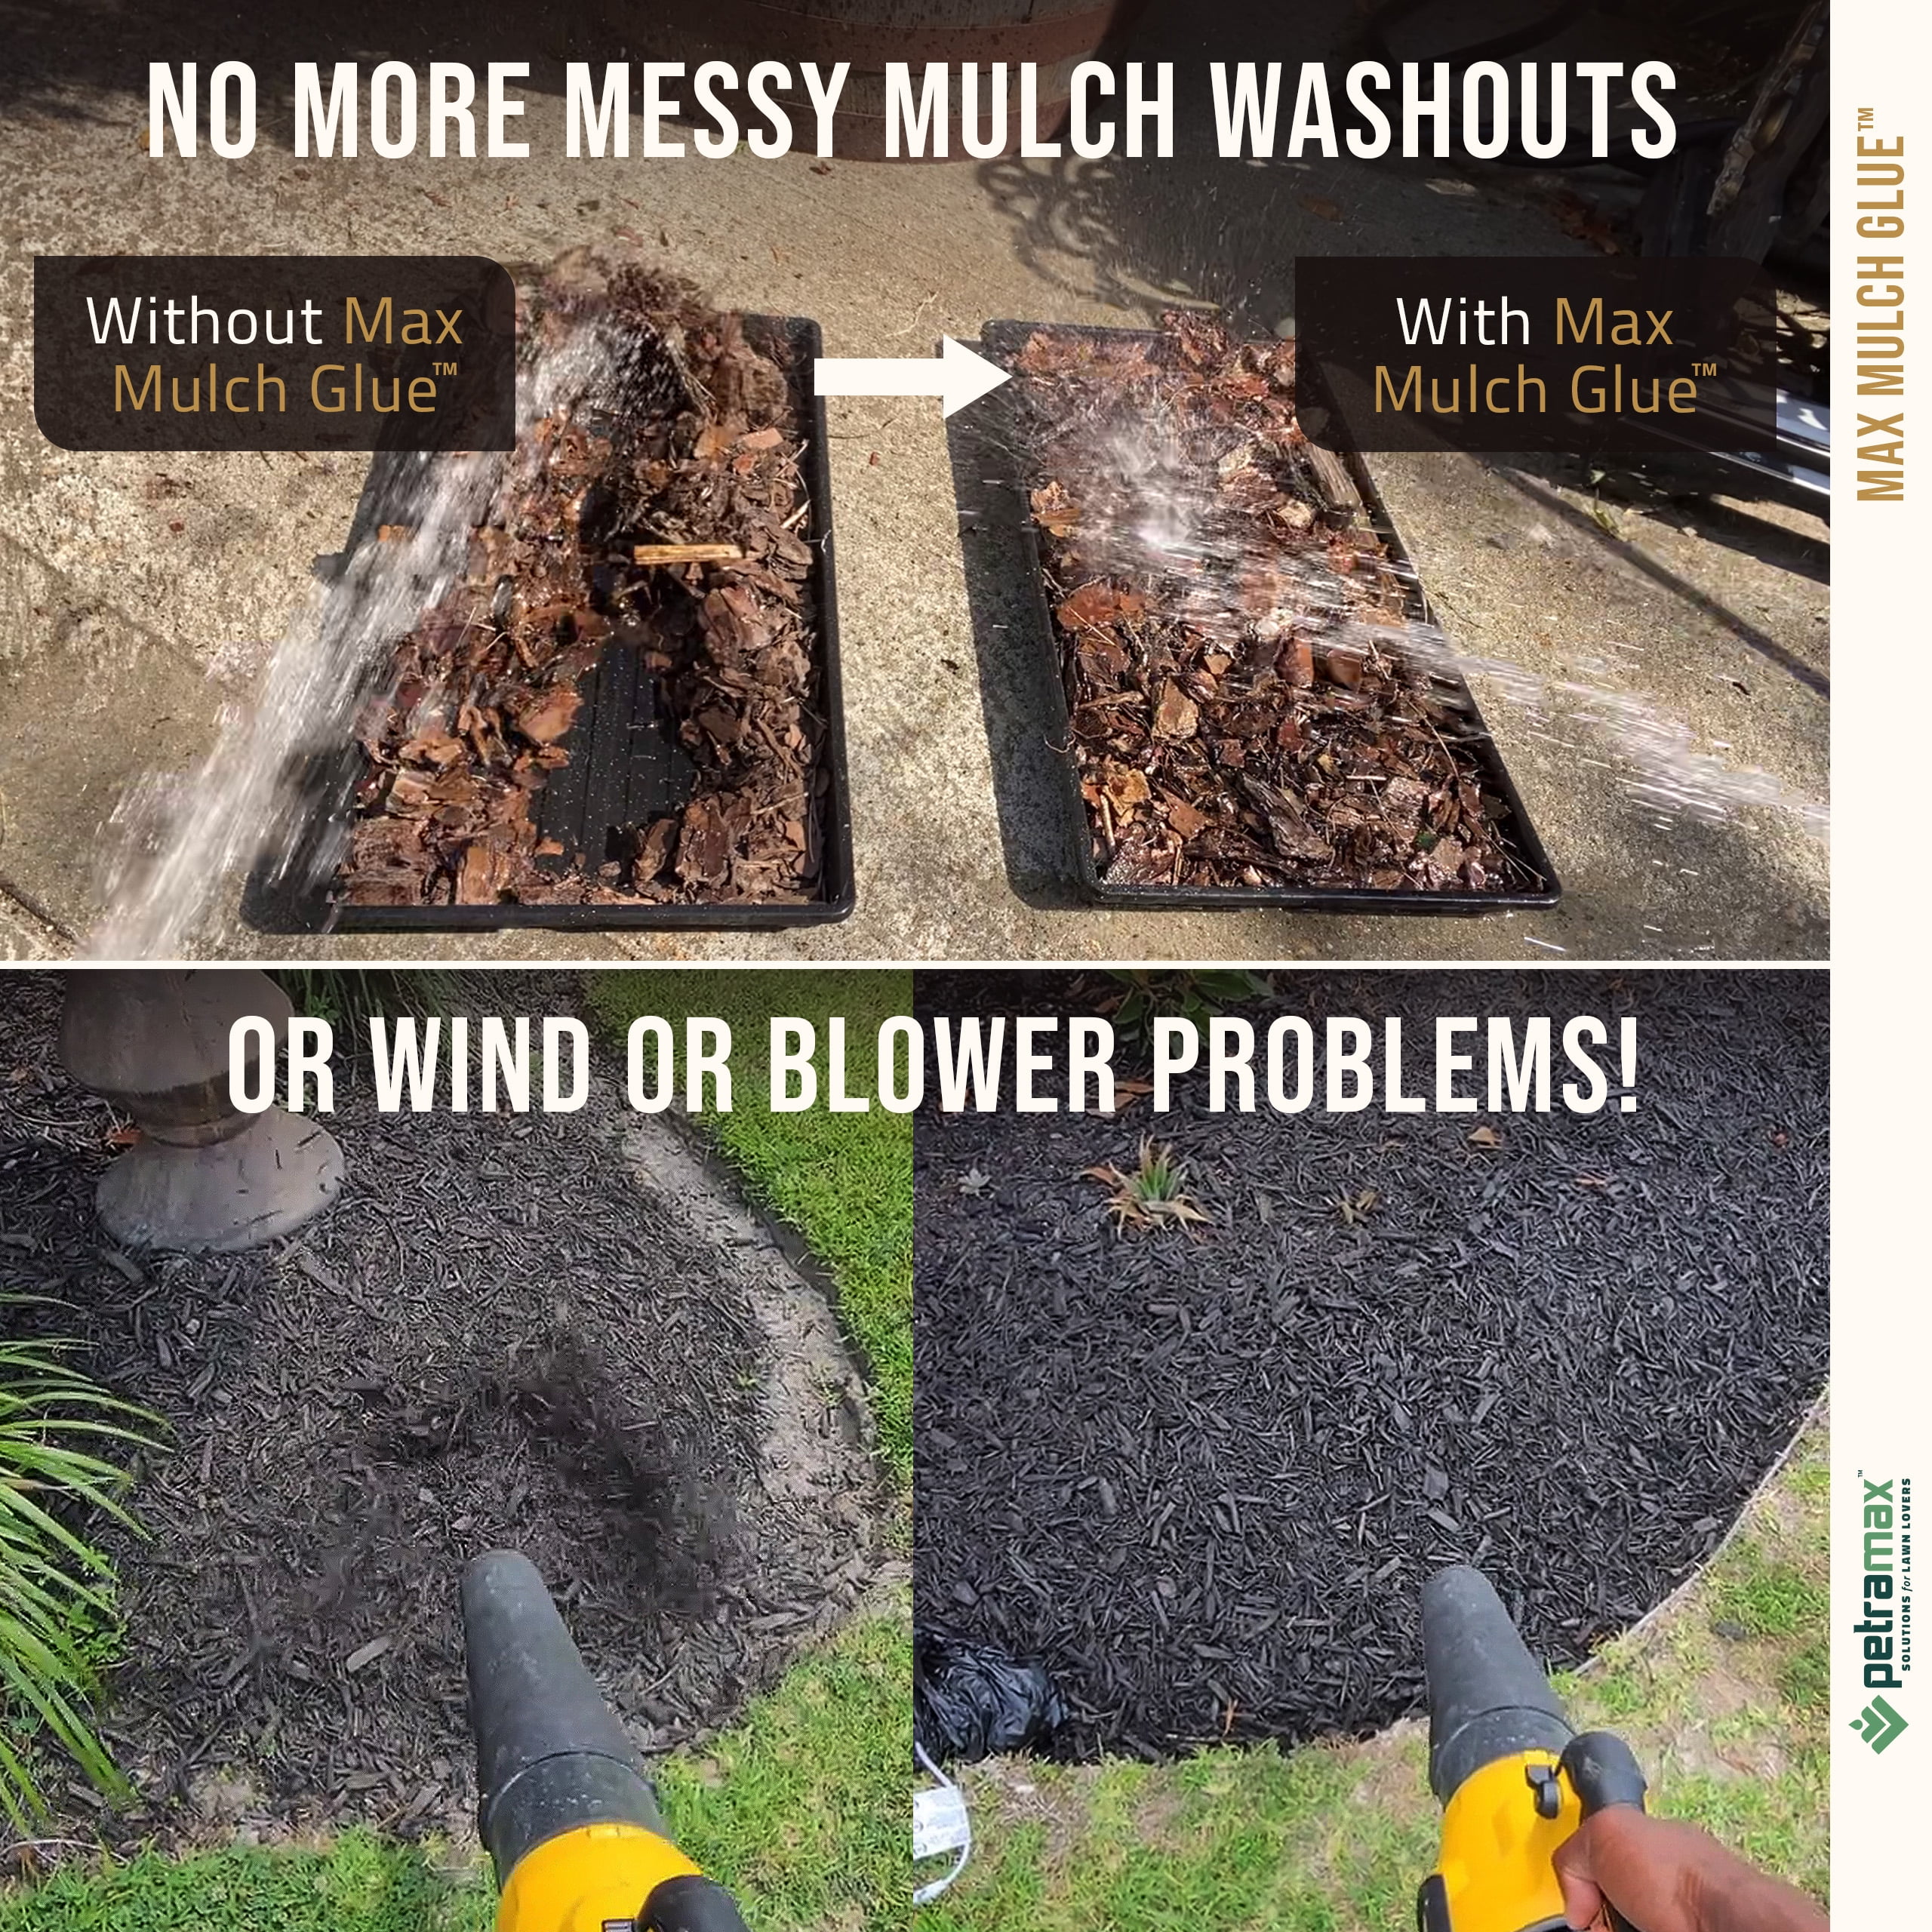 Is Mulch Glue A Game-Changer Or A Waste Of Money? Find Out Now